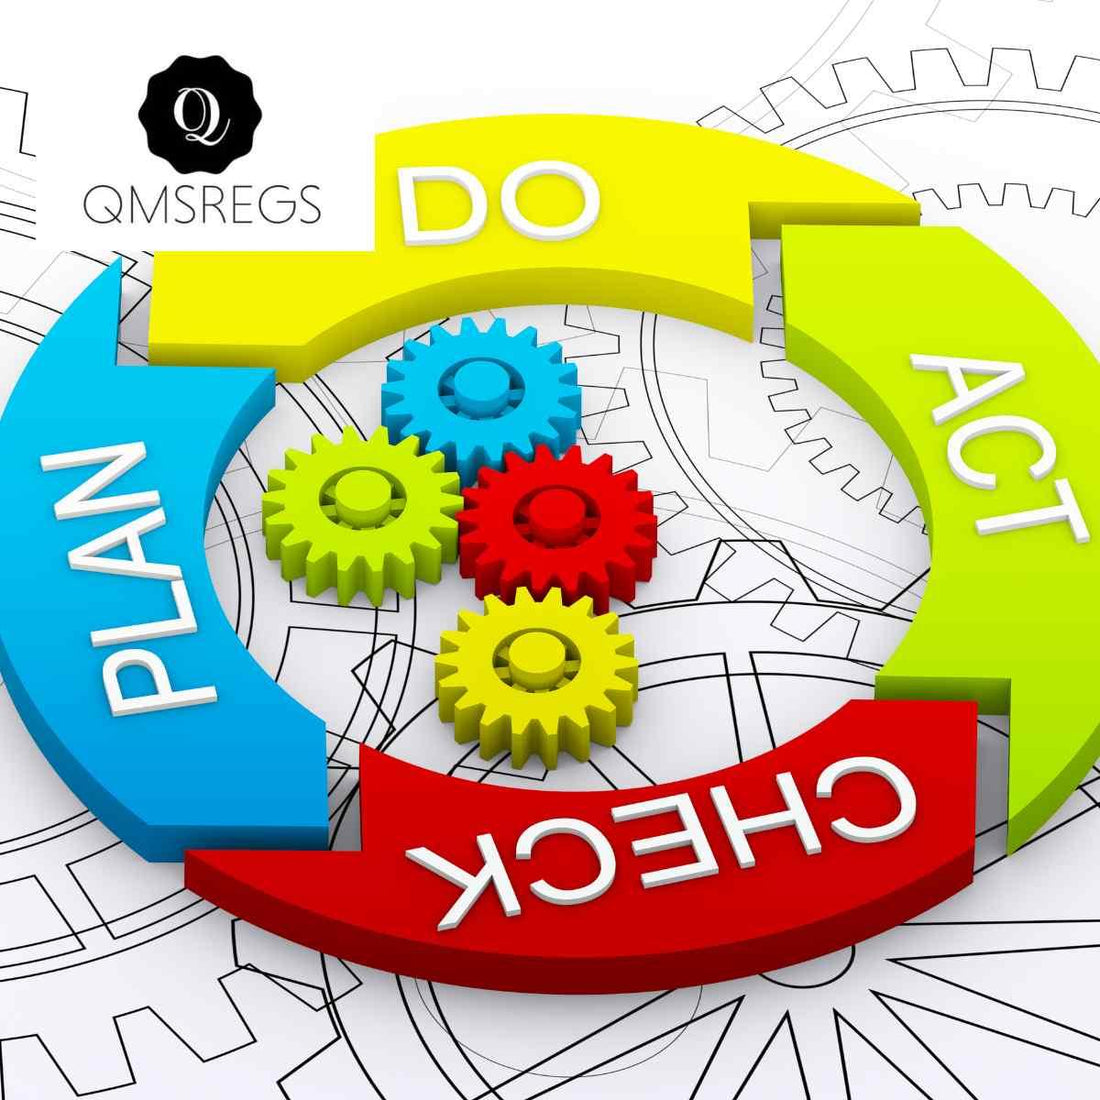 The PDCA Cycle and its Integration in ISO 9001 and ISO 13485 - QMSRegs.com